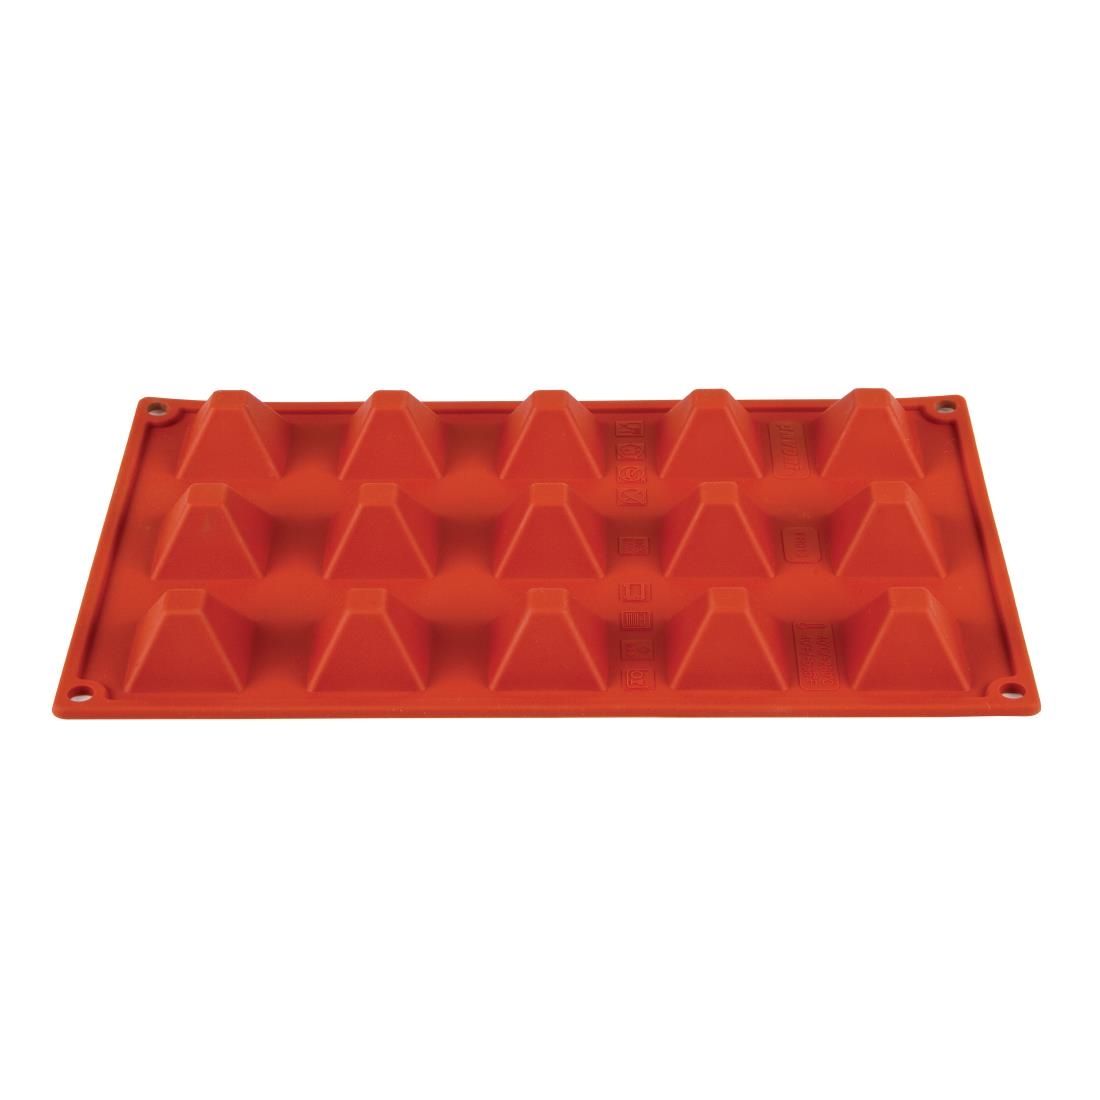 N942 Pavoni Formaflex Silicone Pyramid Mould 15 Cup